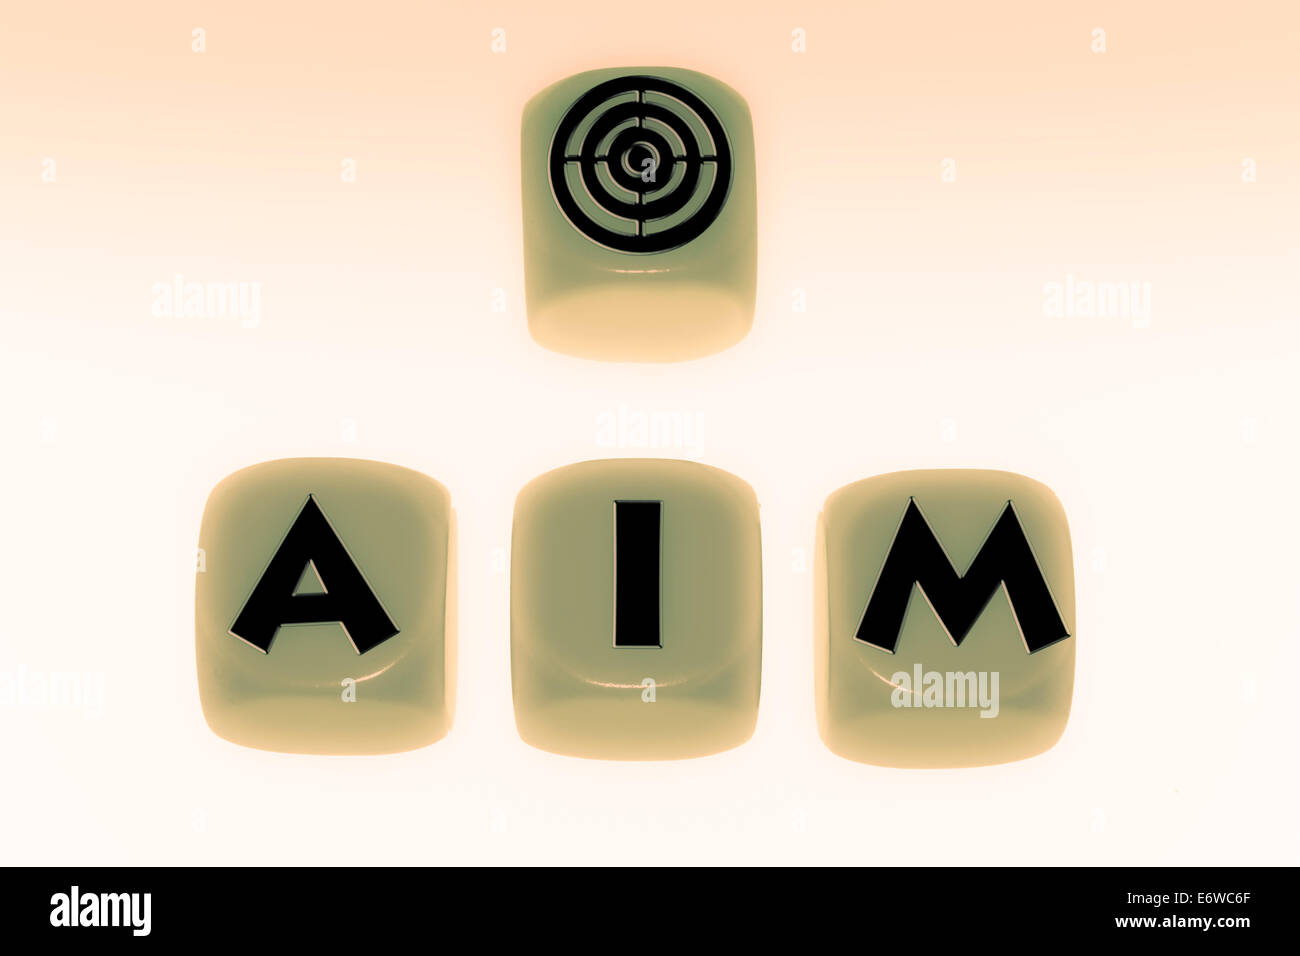 aim symbol with word AIM on cubes Stock Photo